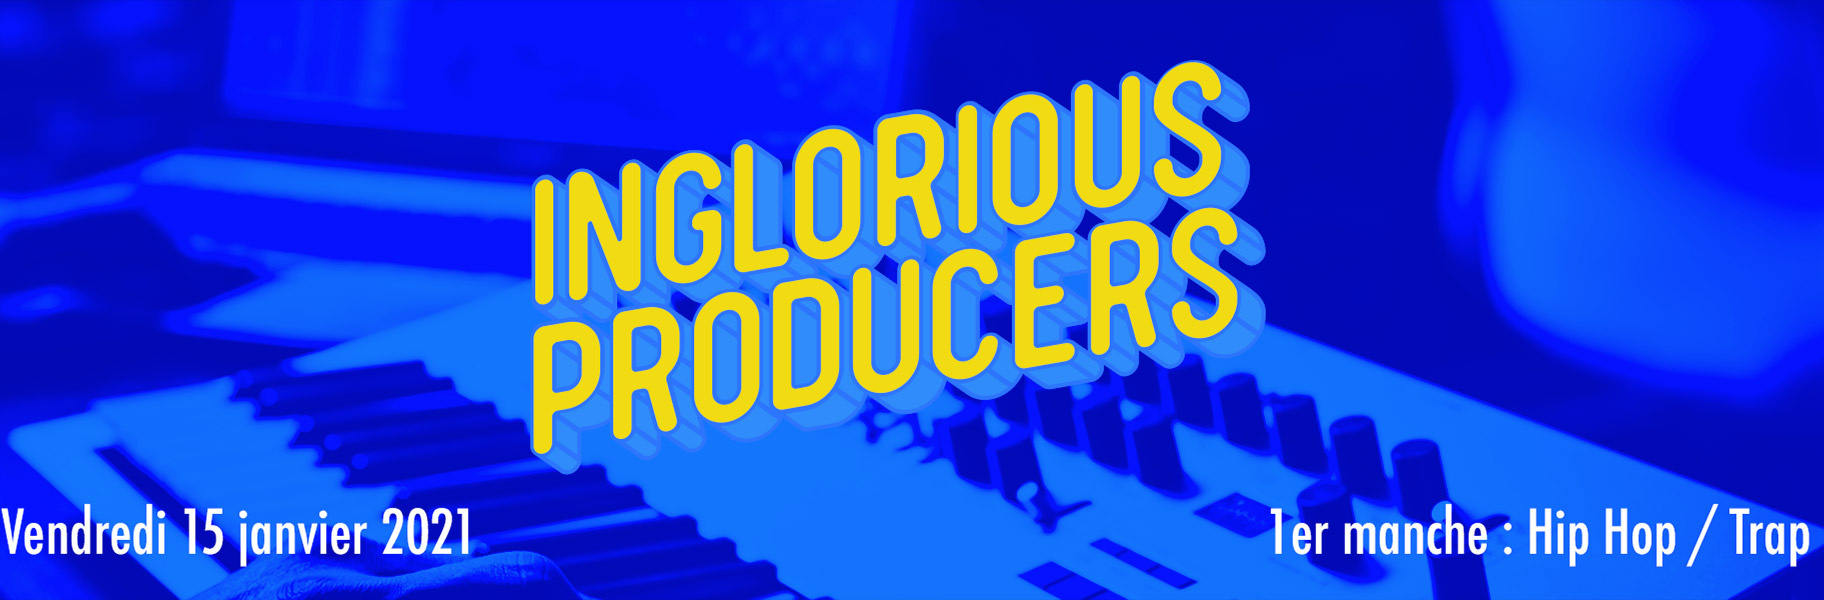 News - Inglorious Producers - 1er manche